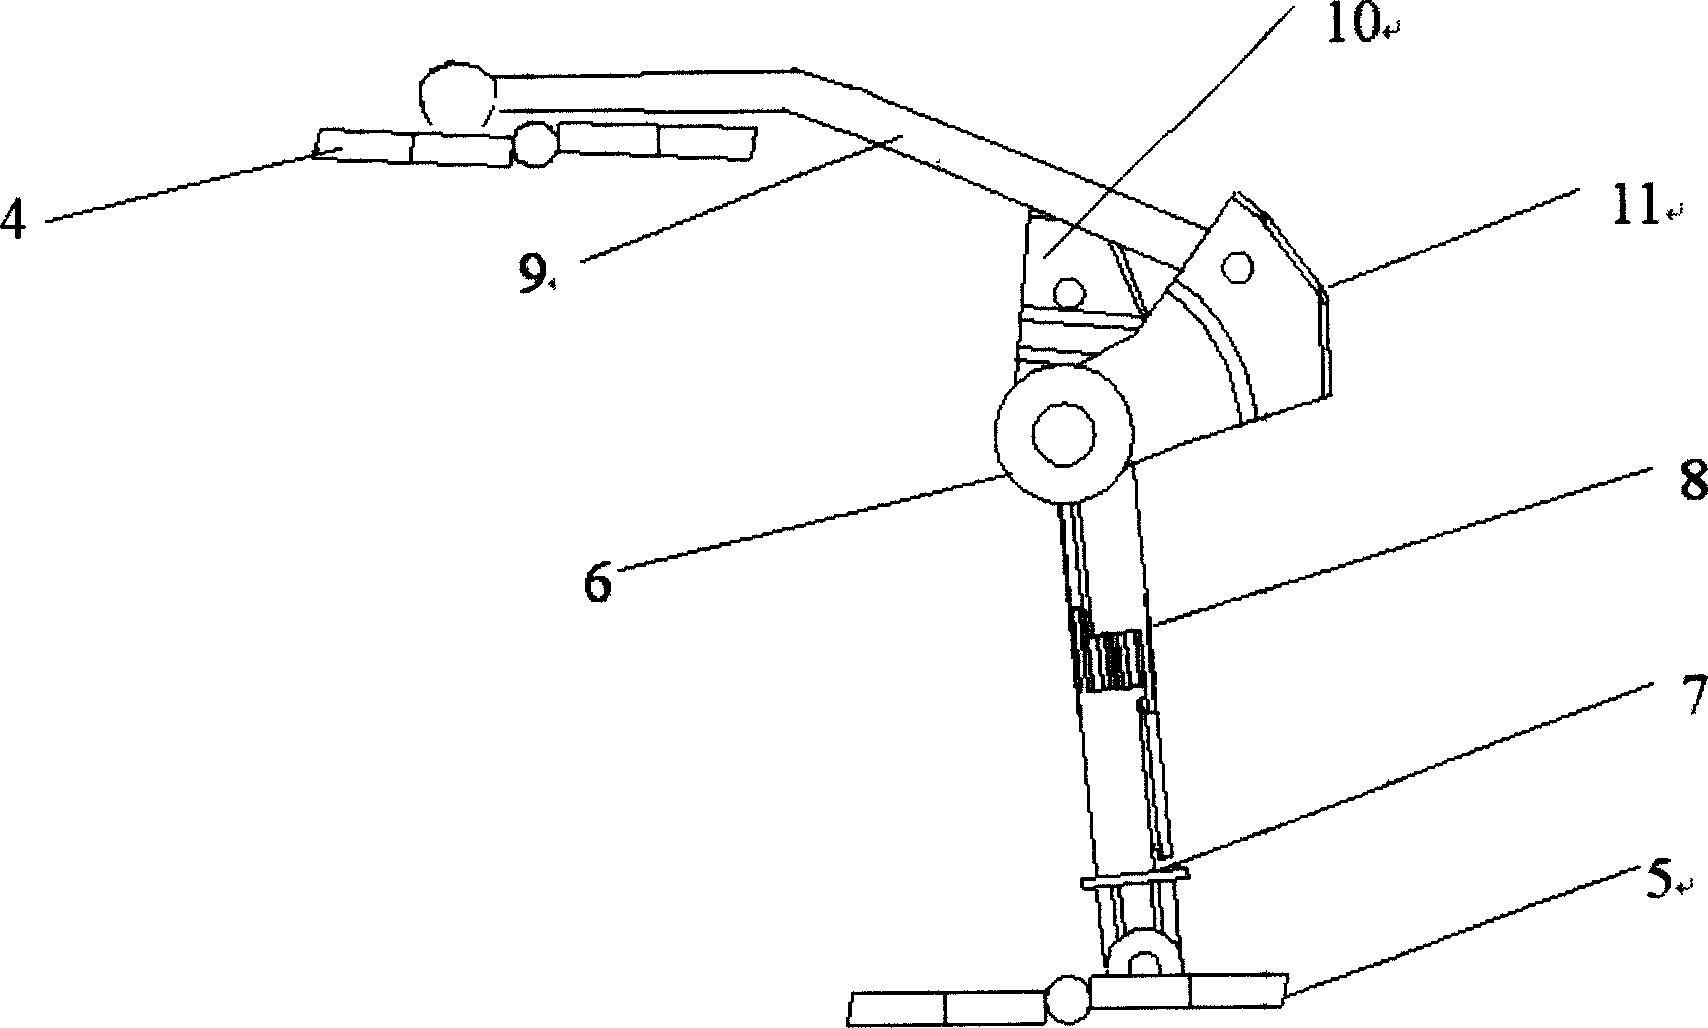 Automobile air-conditioning throttle linkage mechanism and device